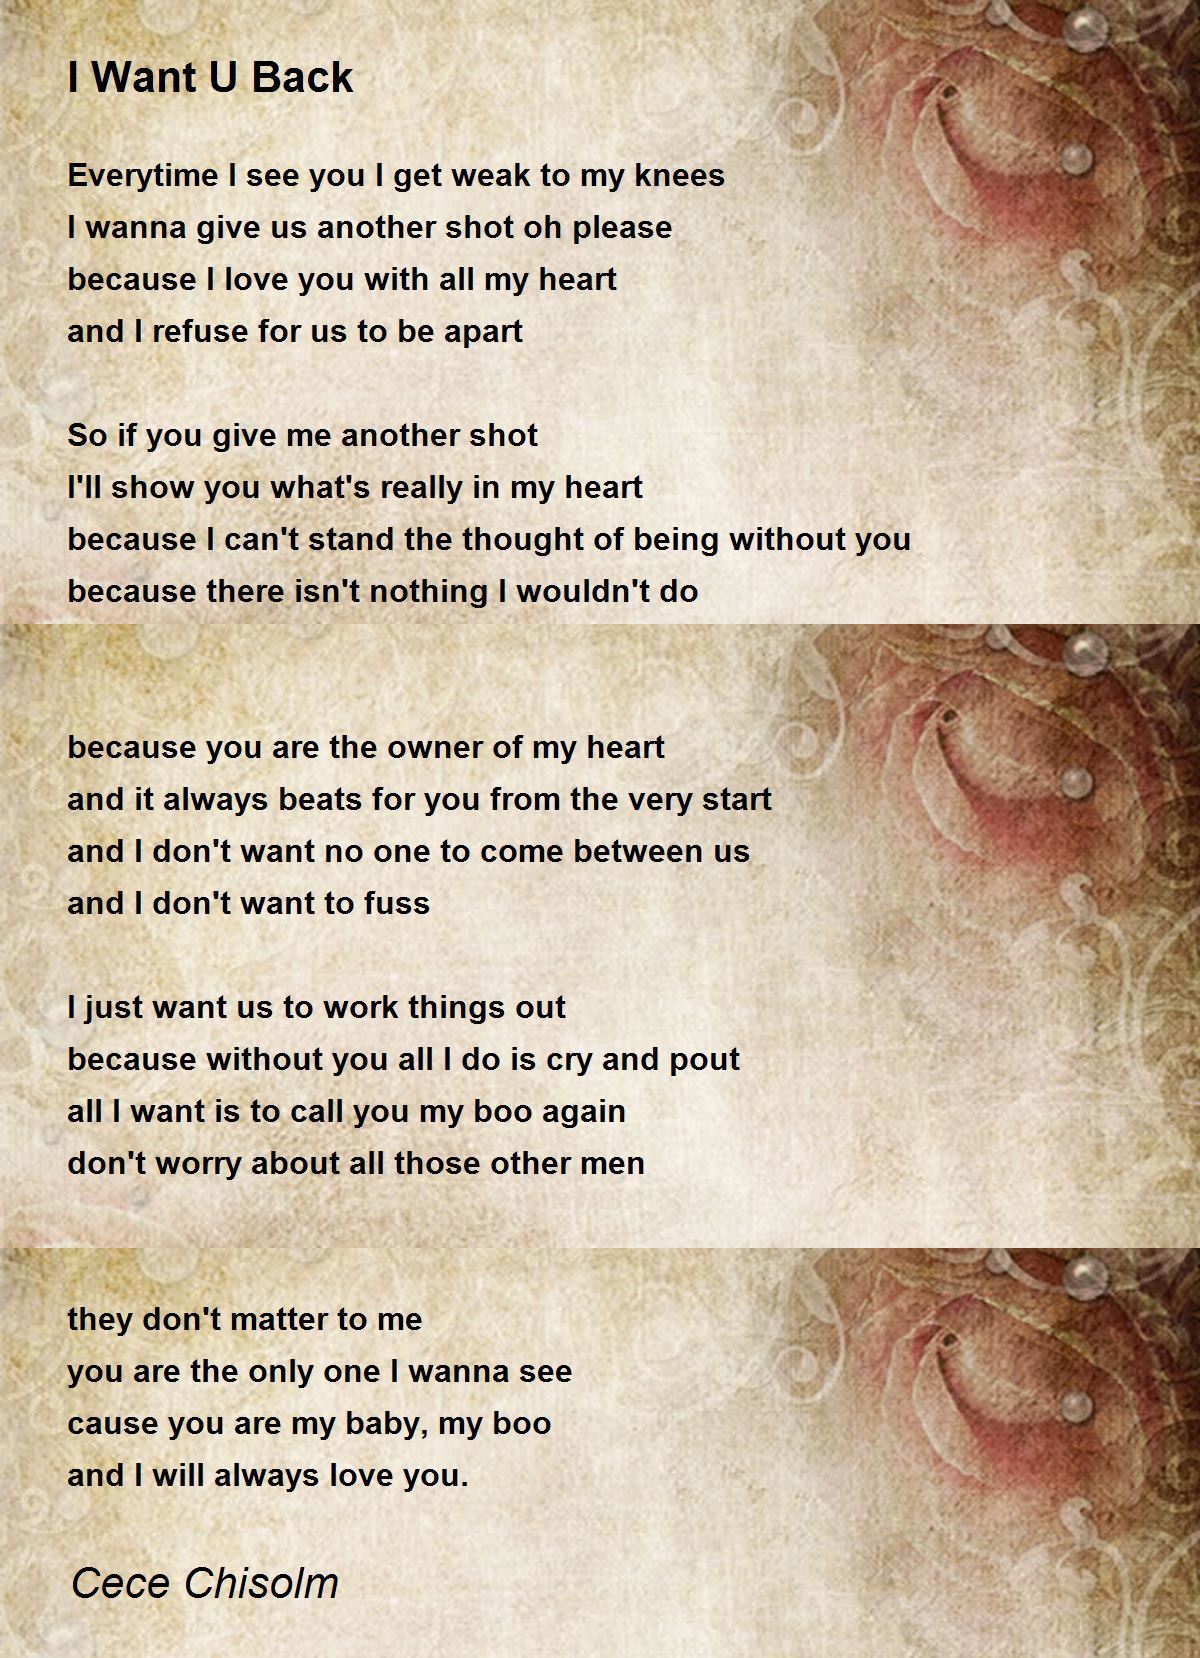 Why i want you poem